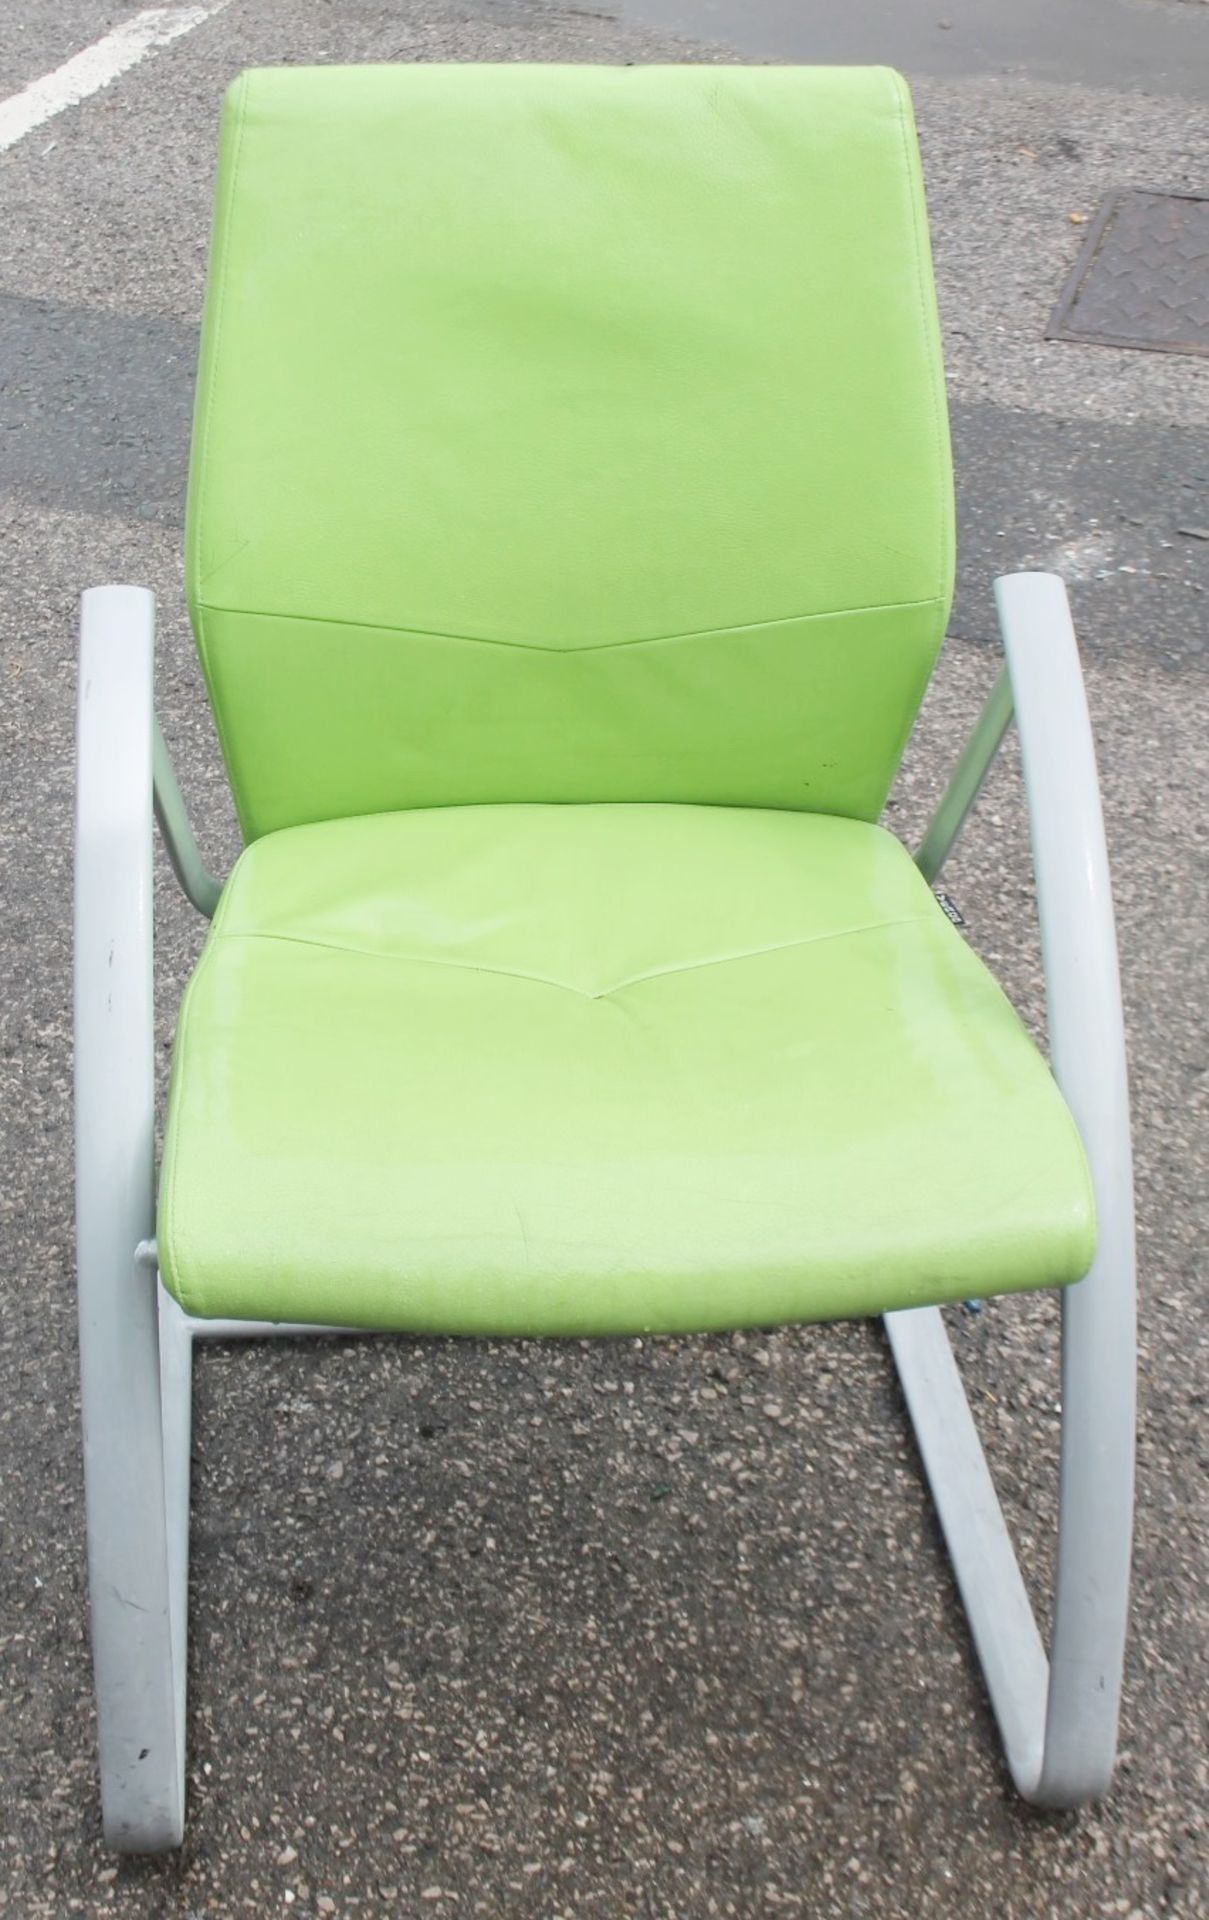 1 x VERCO Branded Cantilever Chair Upholstered In A Lime Faux Leather - Removed From An Executive - Image 3 of 5